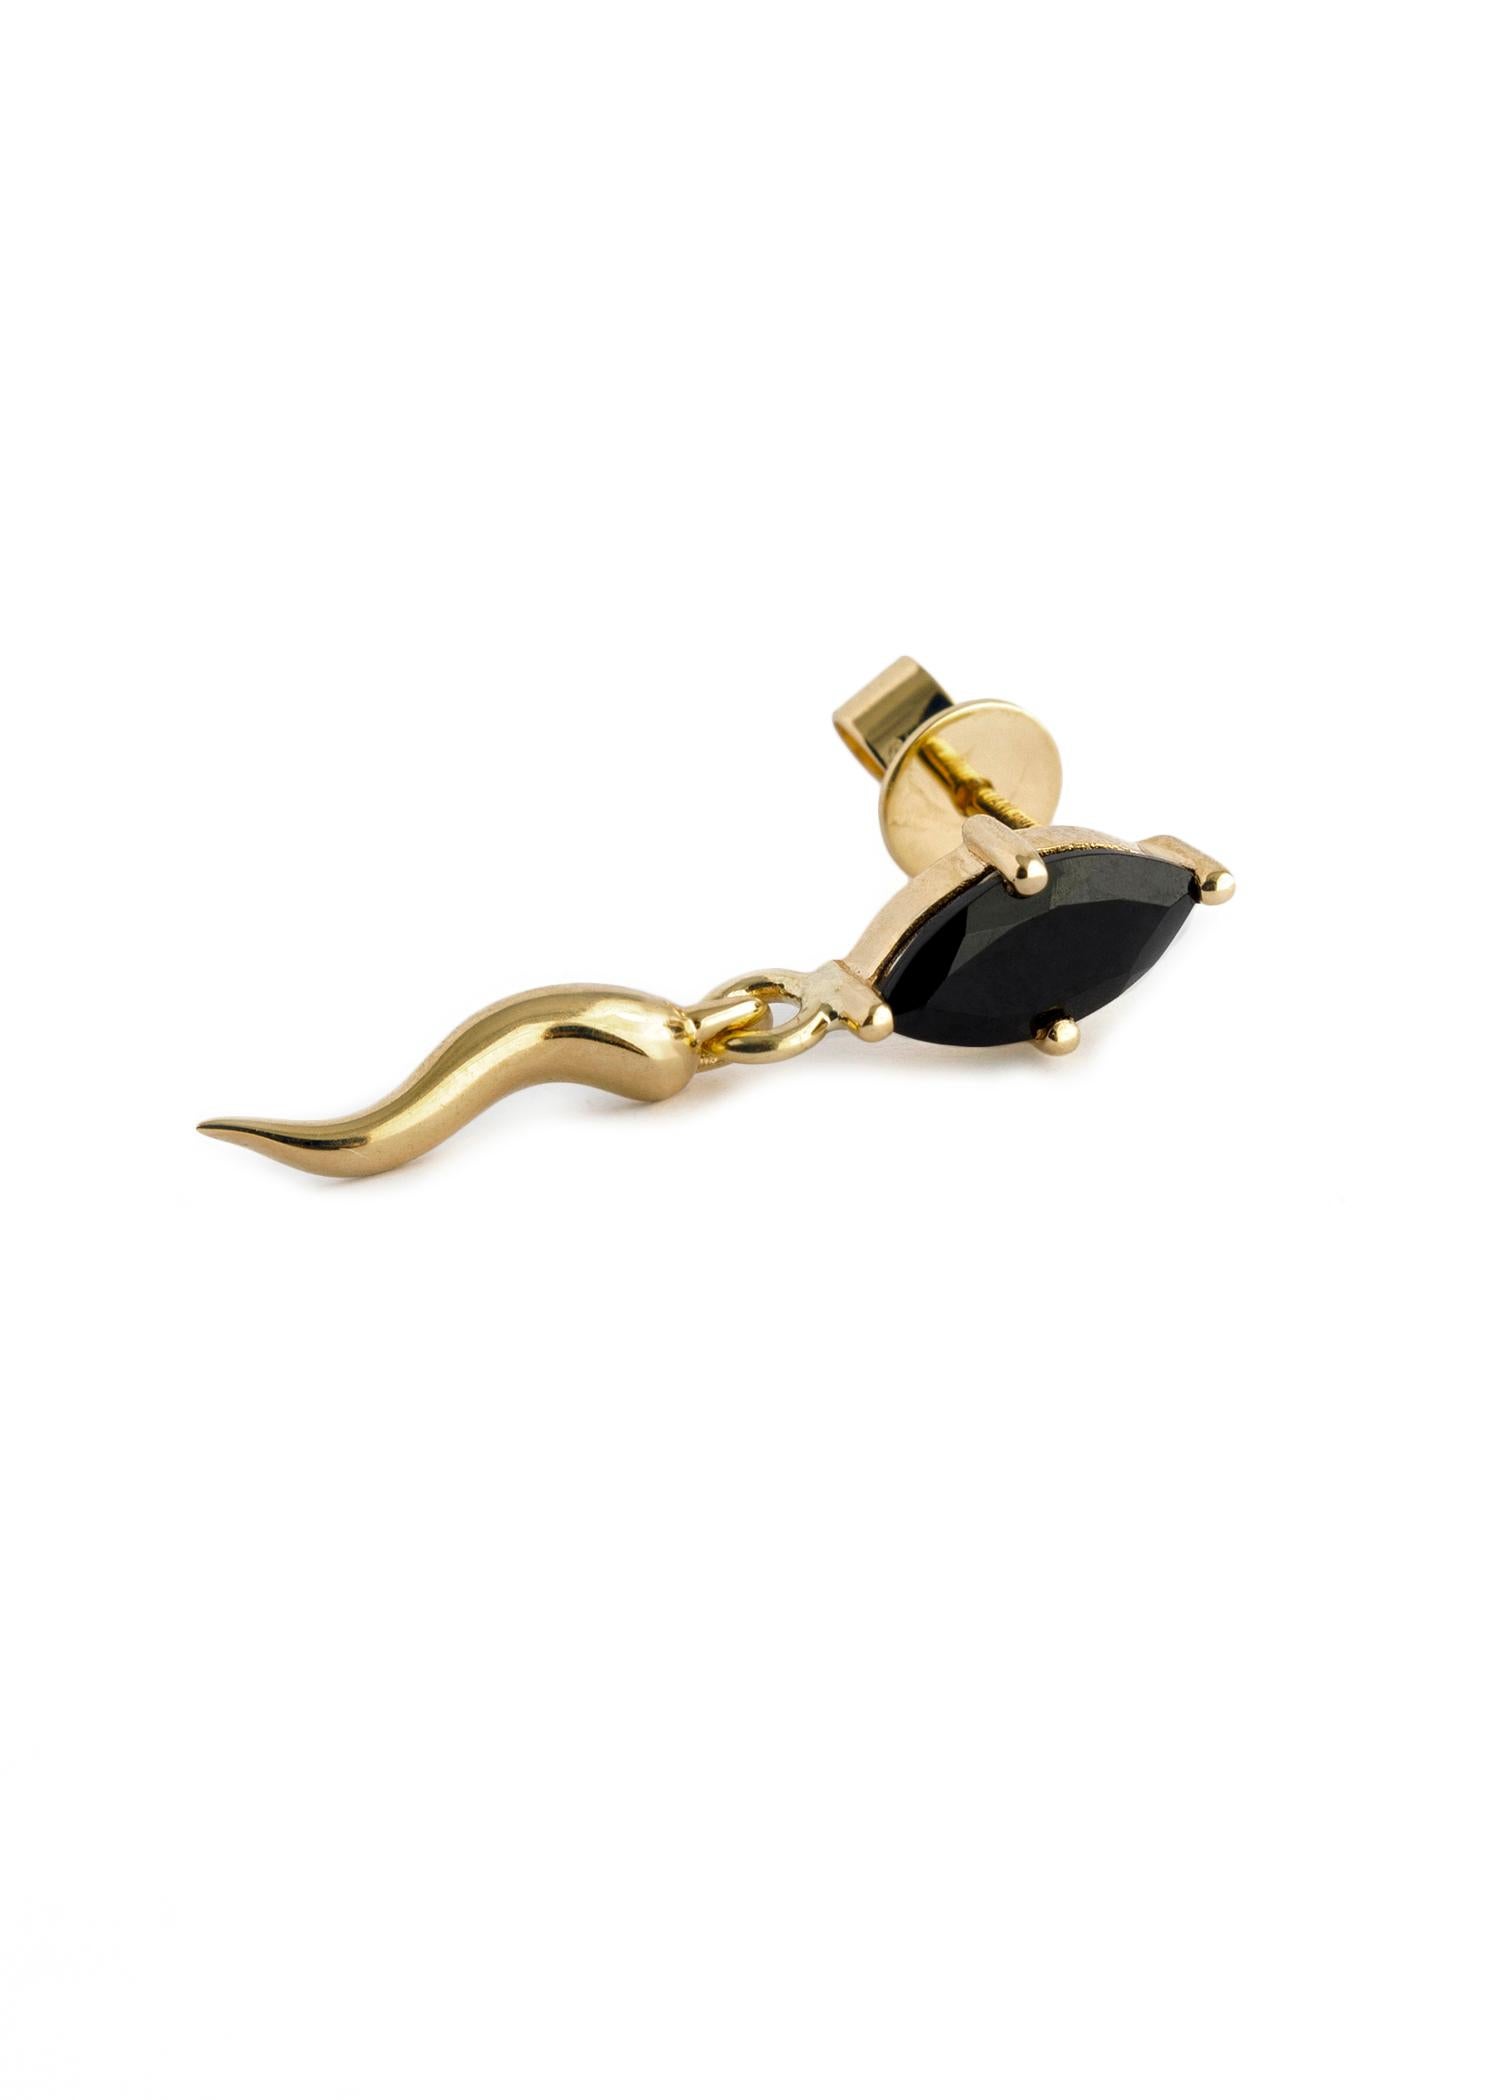 Garnet Dangle Earring in 10 Carat Yellow Gold from IOSSELLIANI In New Condition For Sale In Rome, IT